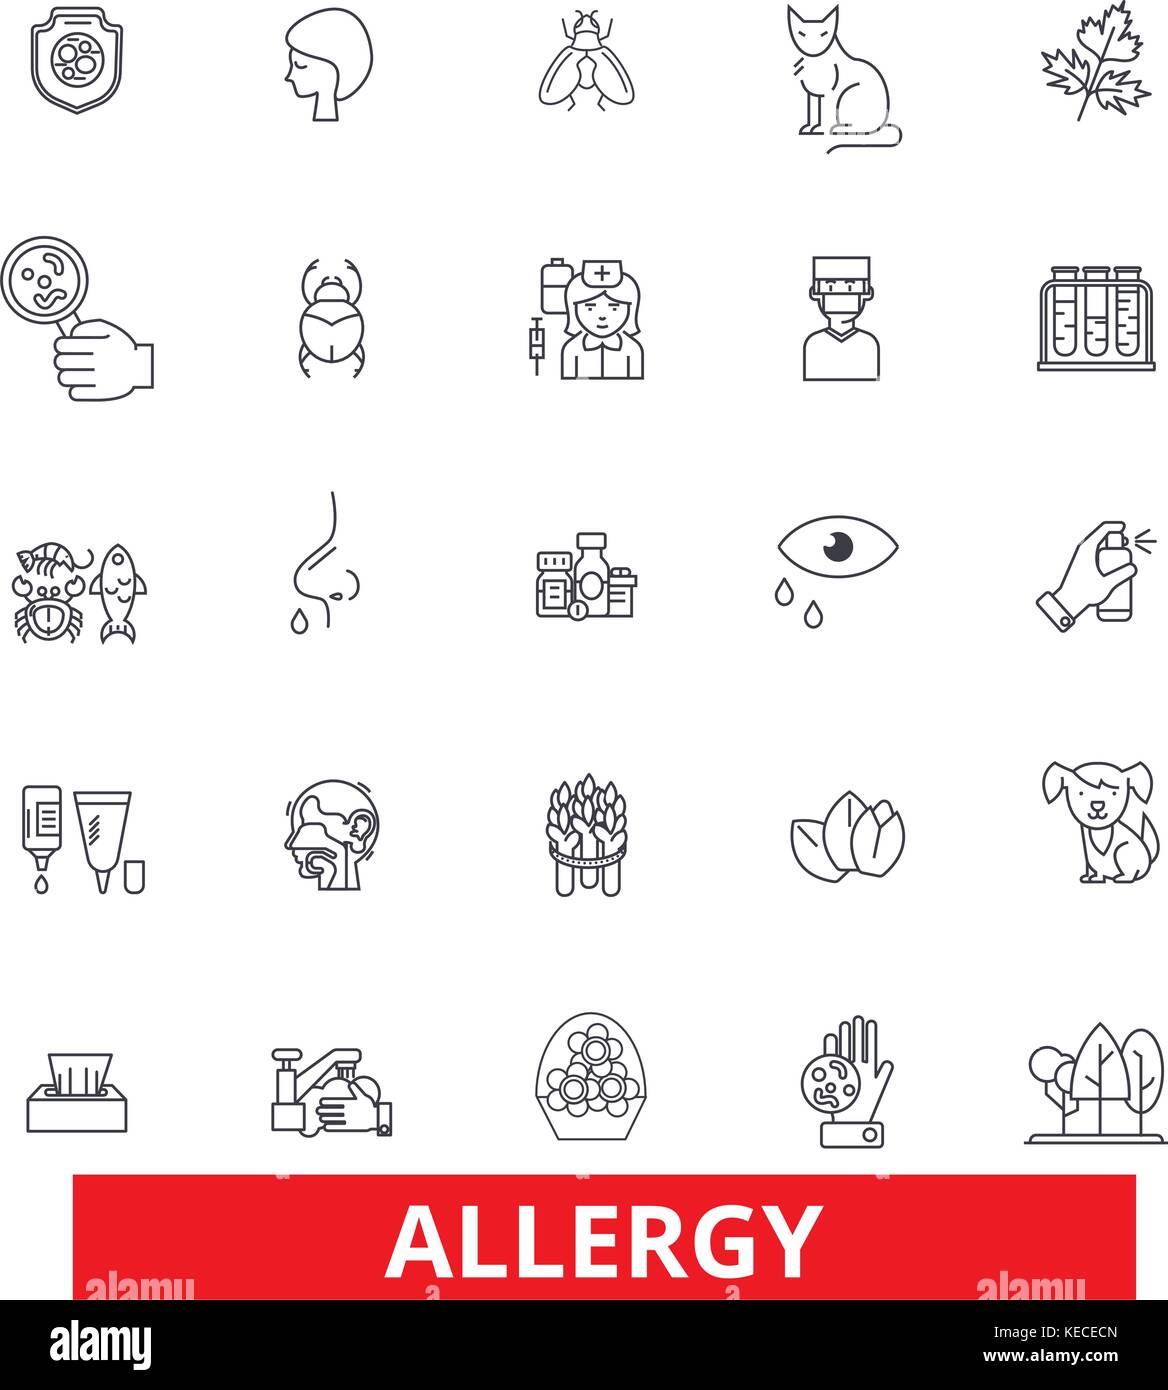 Allergy, food, season, desease, sneeze, pollen, asthma, allergens, allergic line icons. Editable strokes. Flat design vector illustration symbol concept. Linear signs isolated on white background Stock Vector